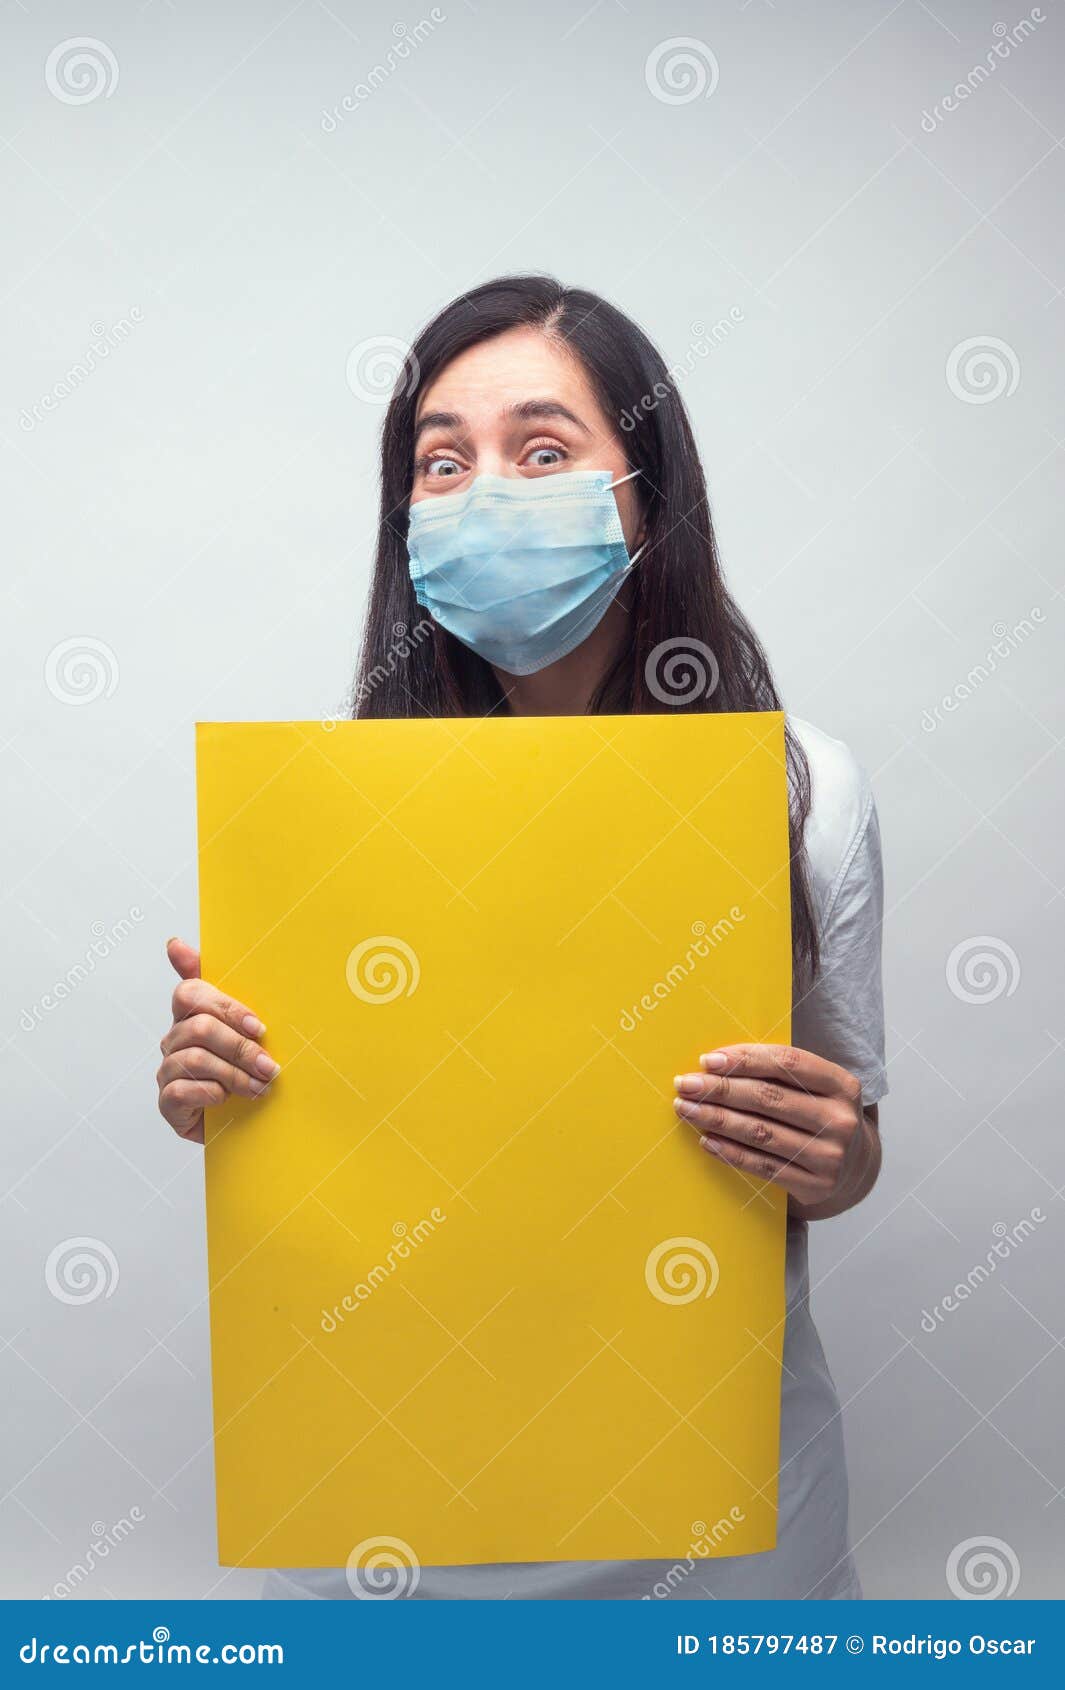 woman with mask and yellow sign - vertical